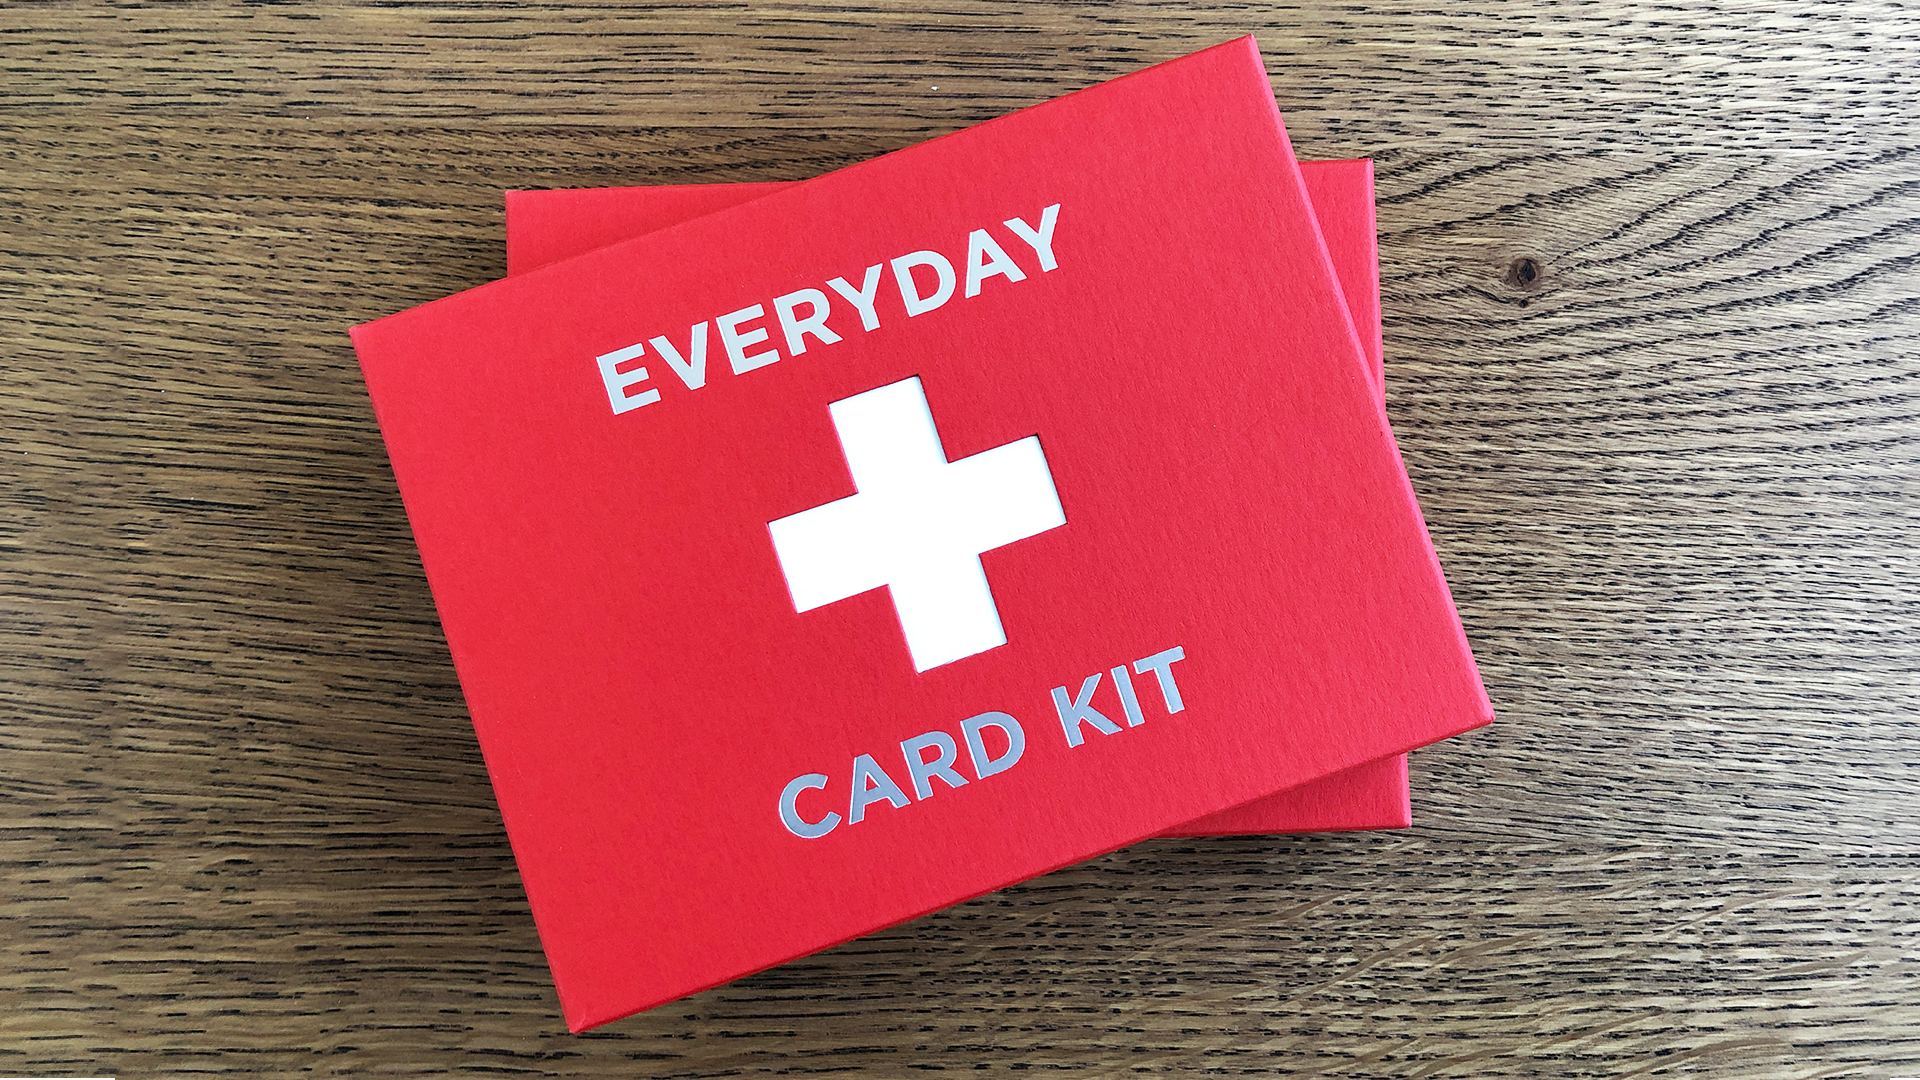 Emergency ‘Everyday Card Kit’ - PaperSpecs